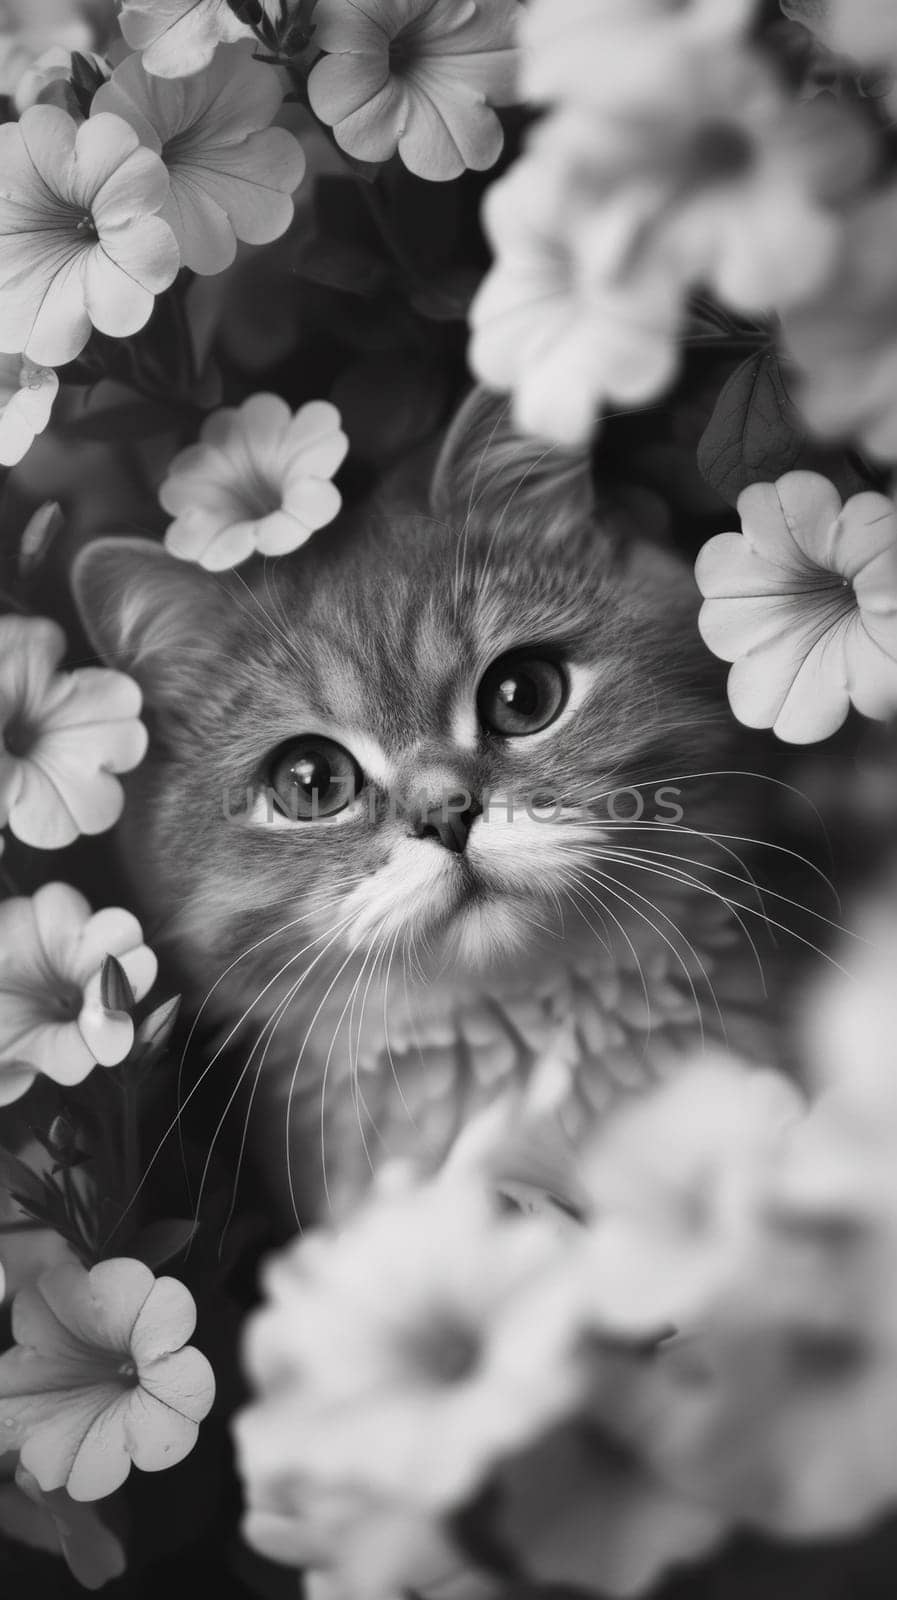 A cat peeking out from behind a bunch of flowers, AI by starush